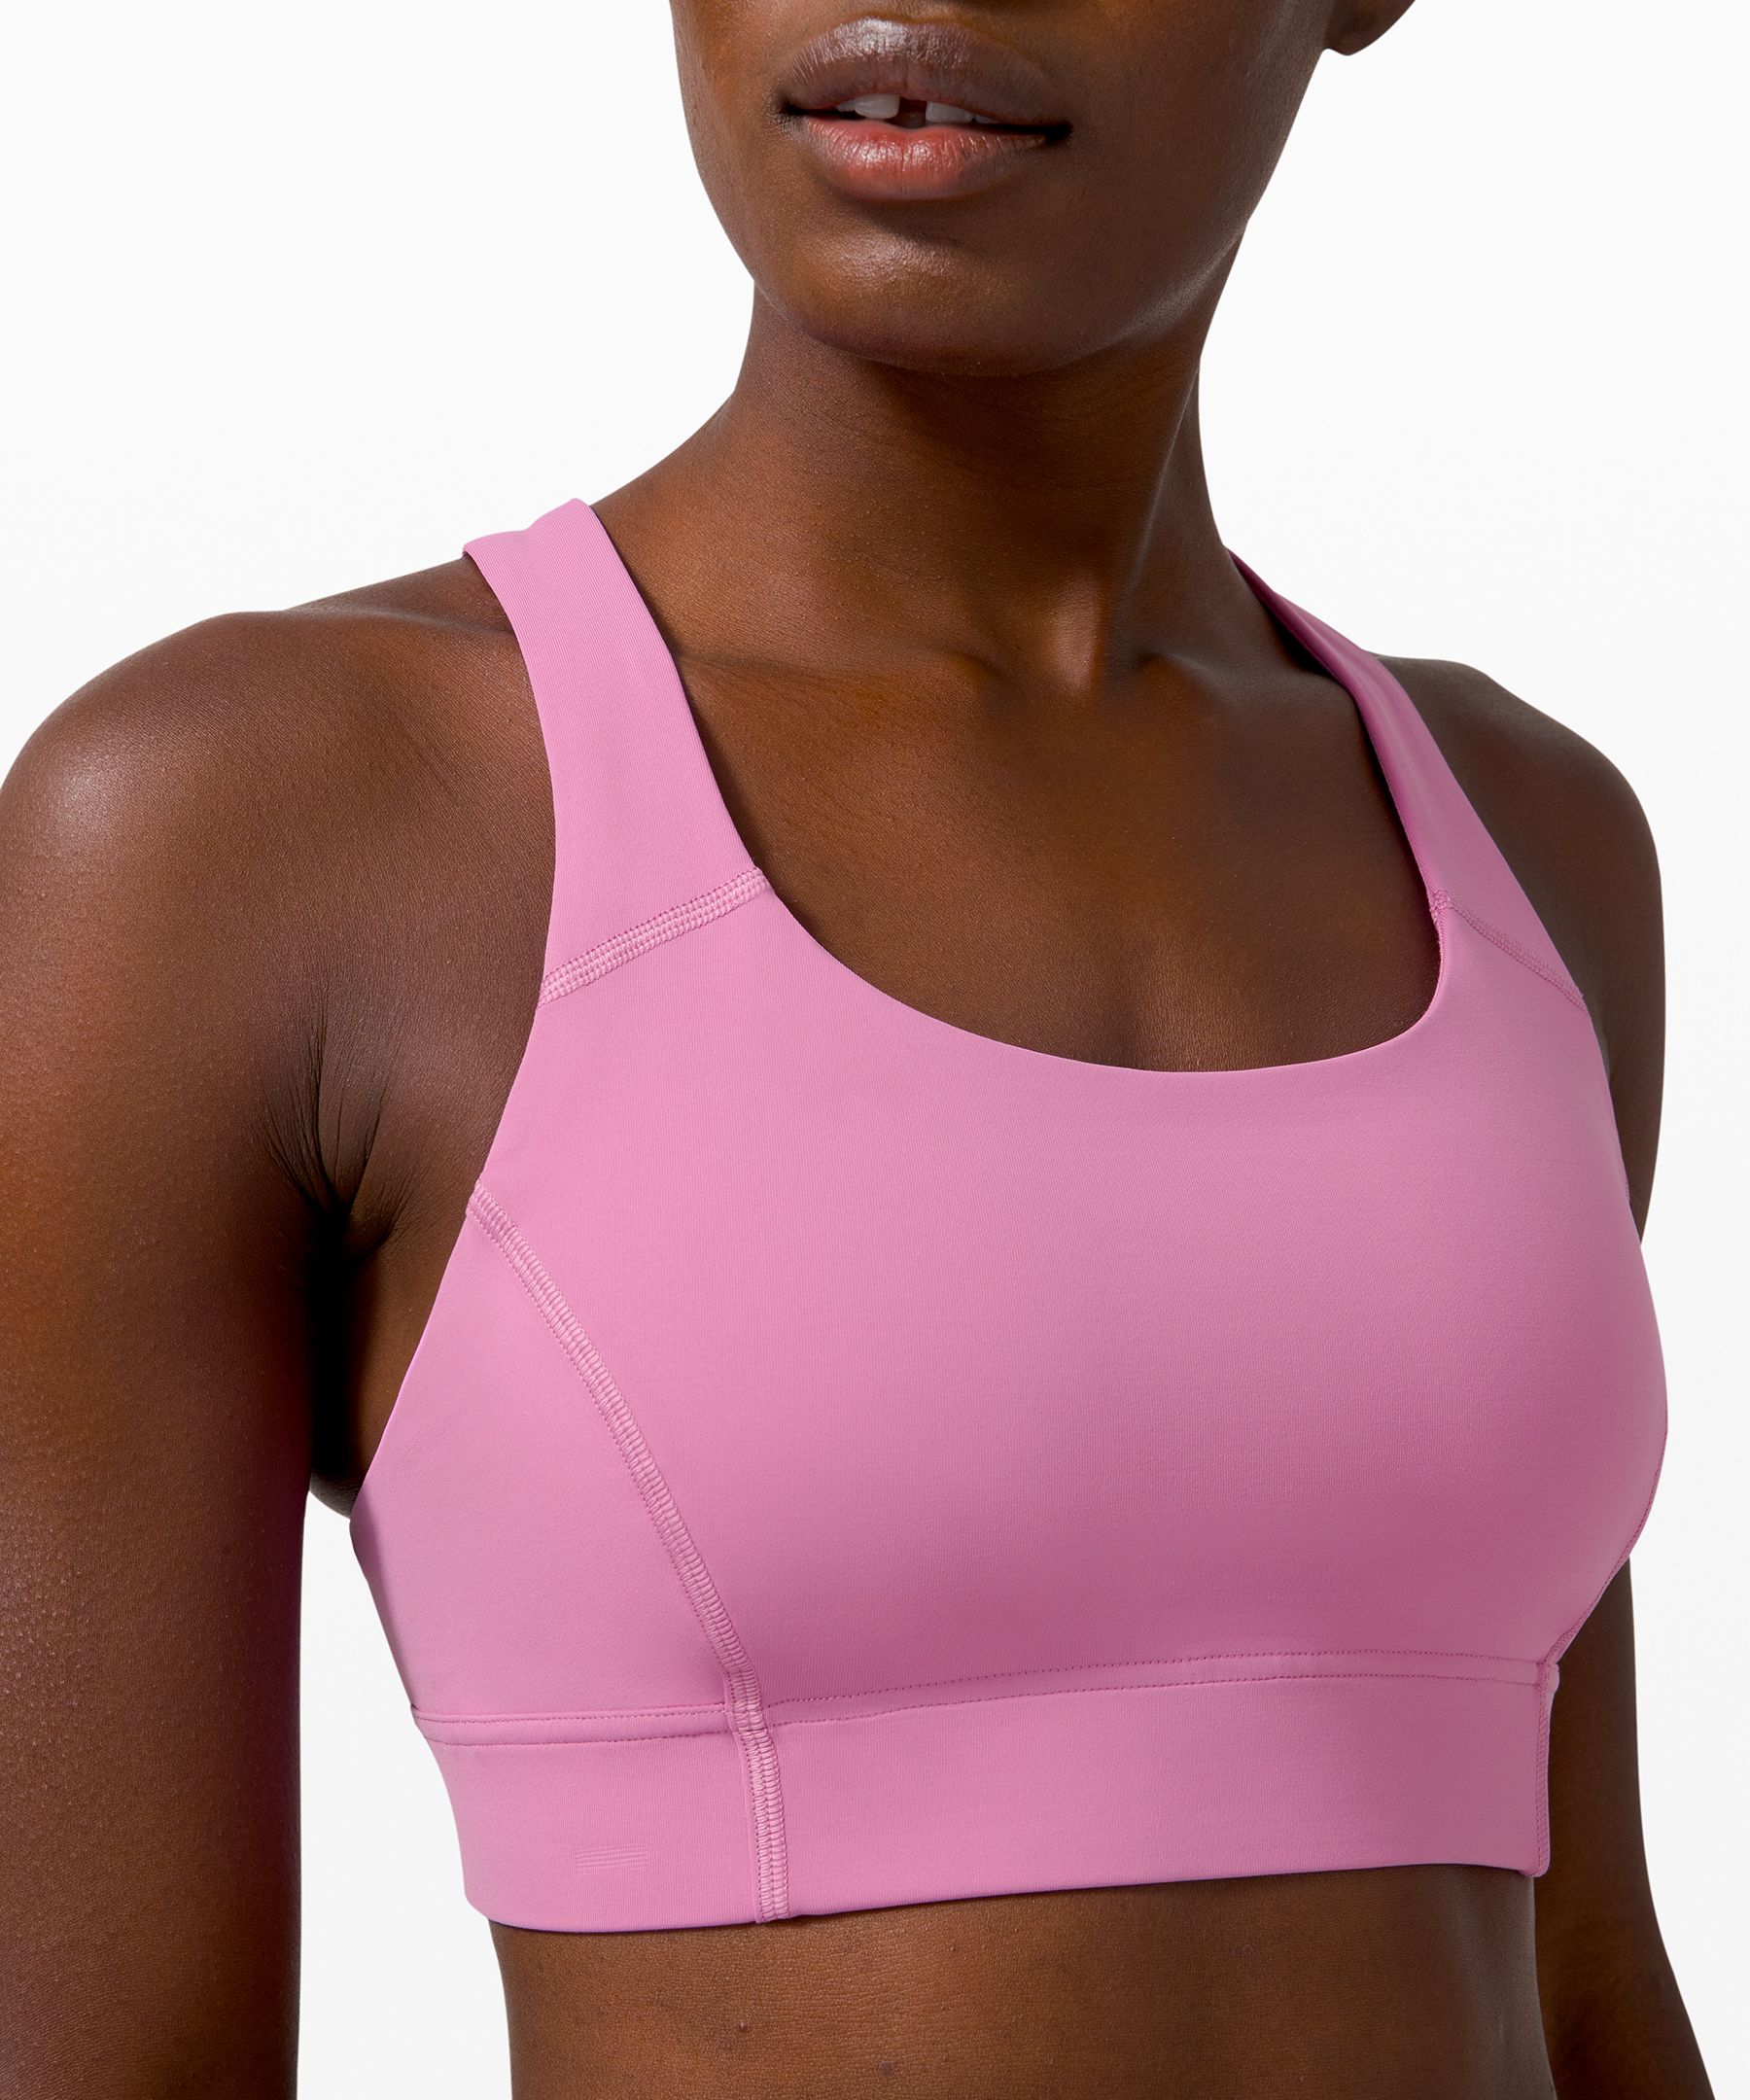 SYROKAN Women's Sports Bra High Impact Double Layer Wirefree Padded  Racerback